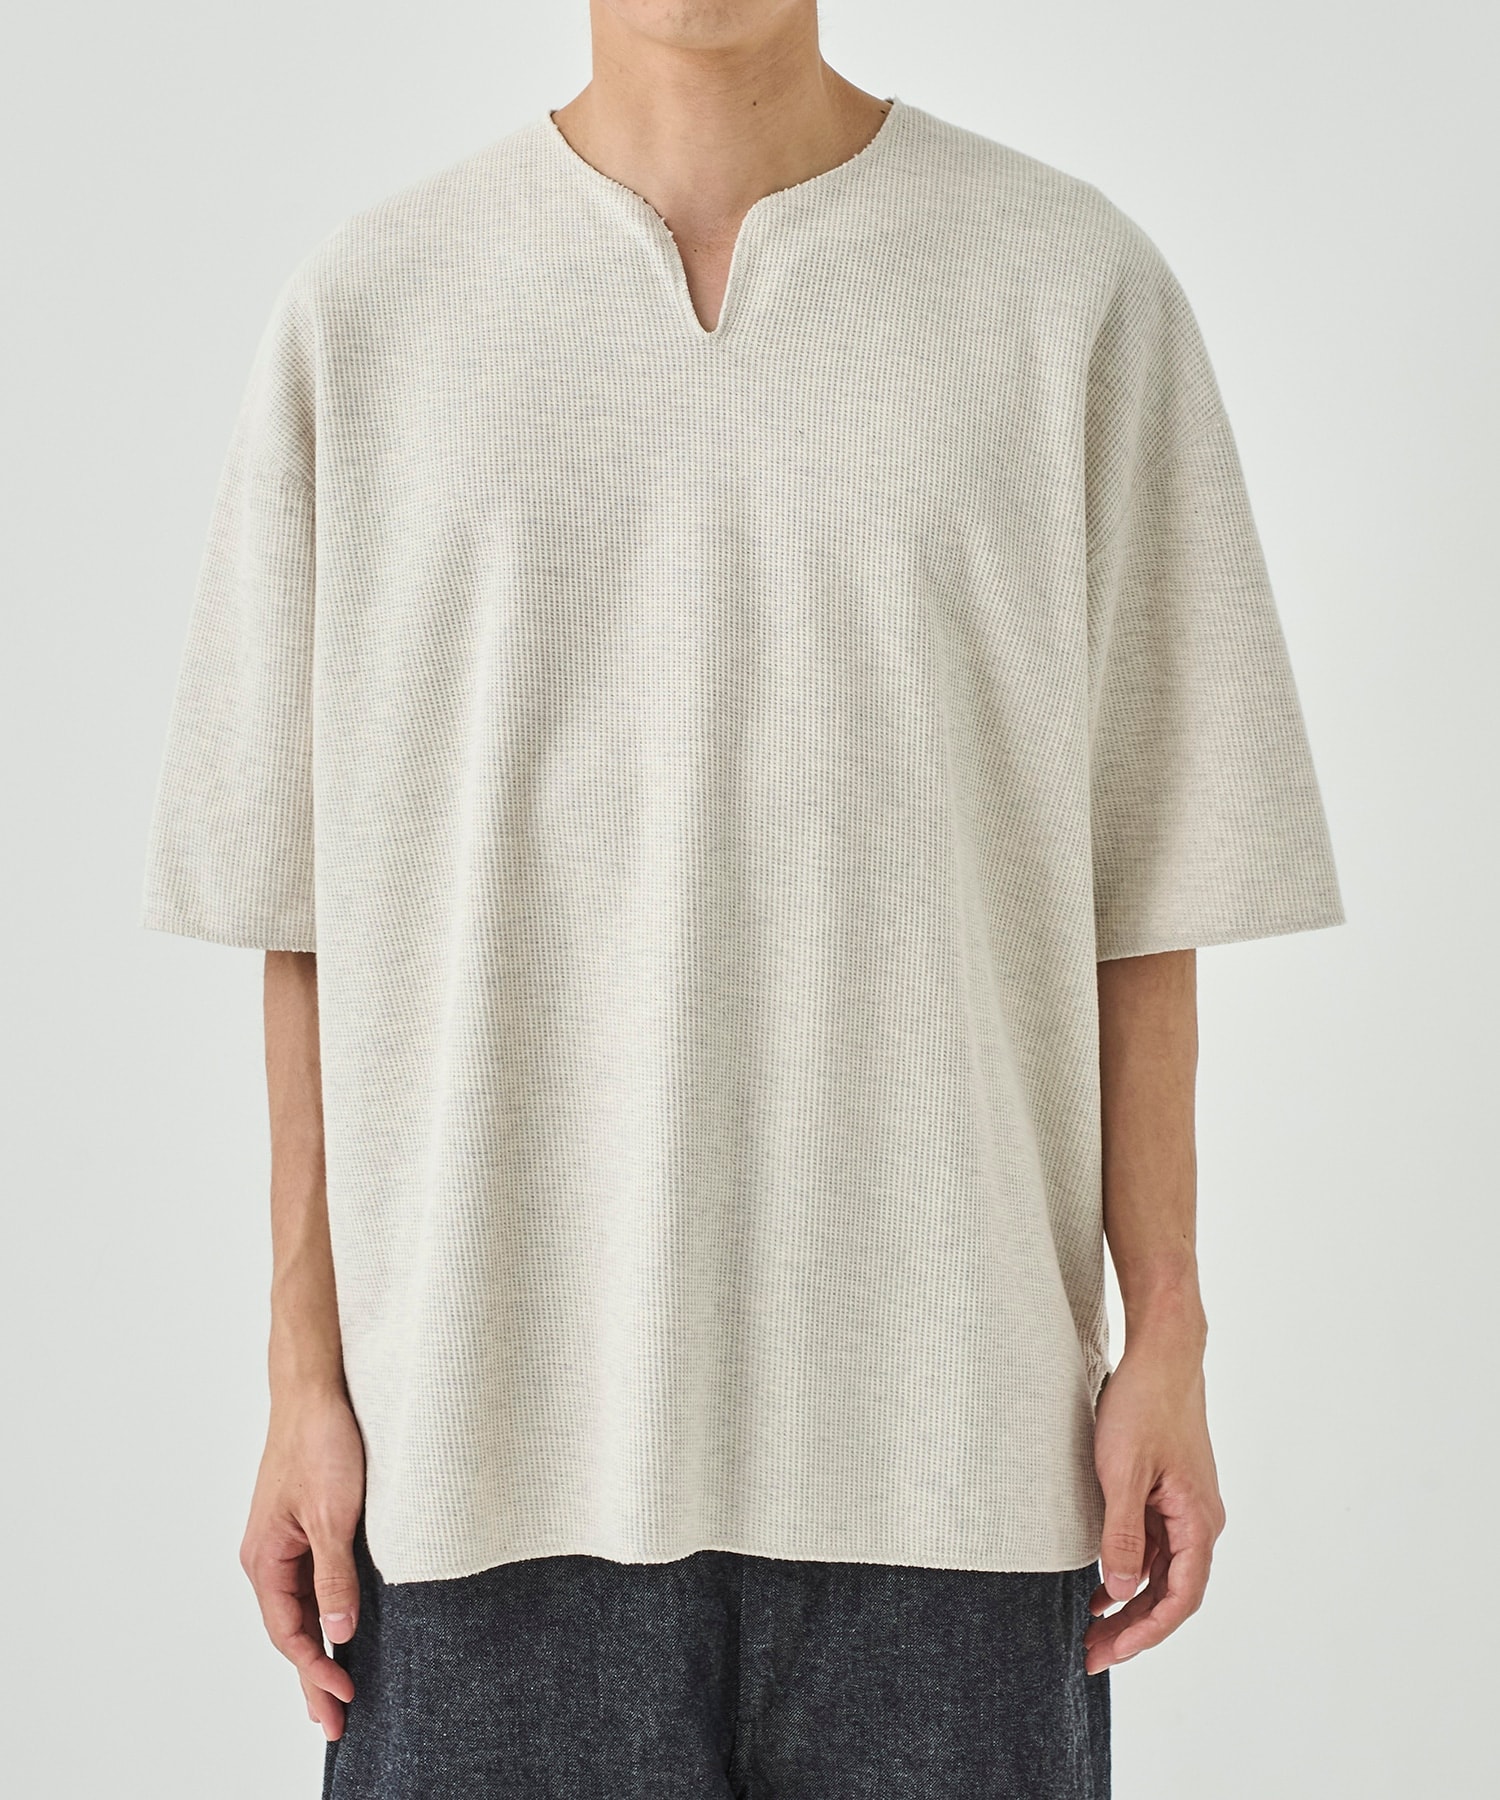 Rough&Smooth Thermal Over-neck blurhms